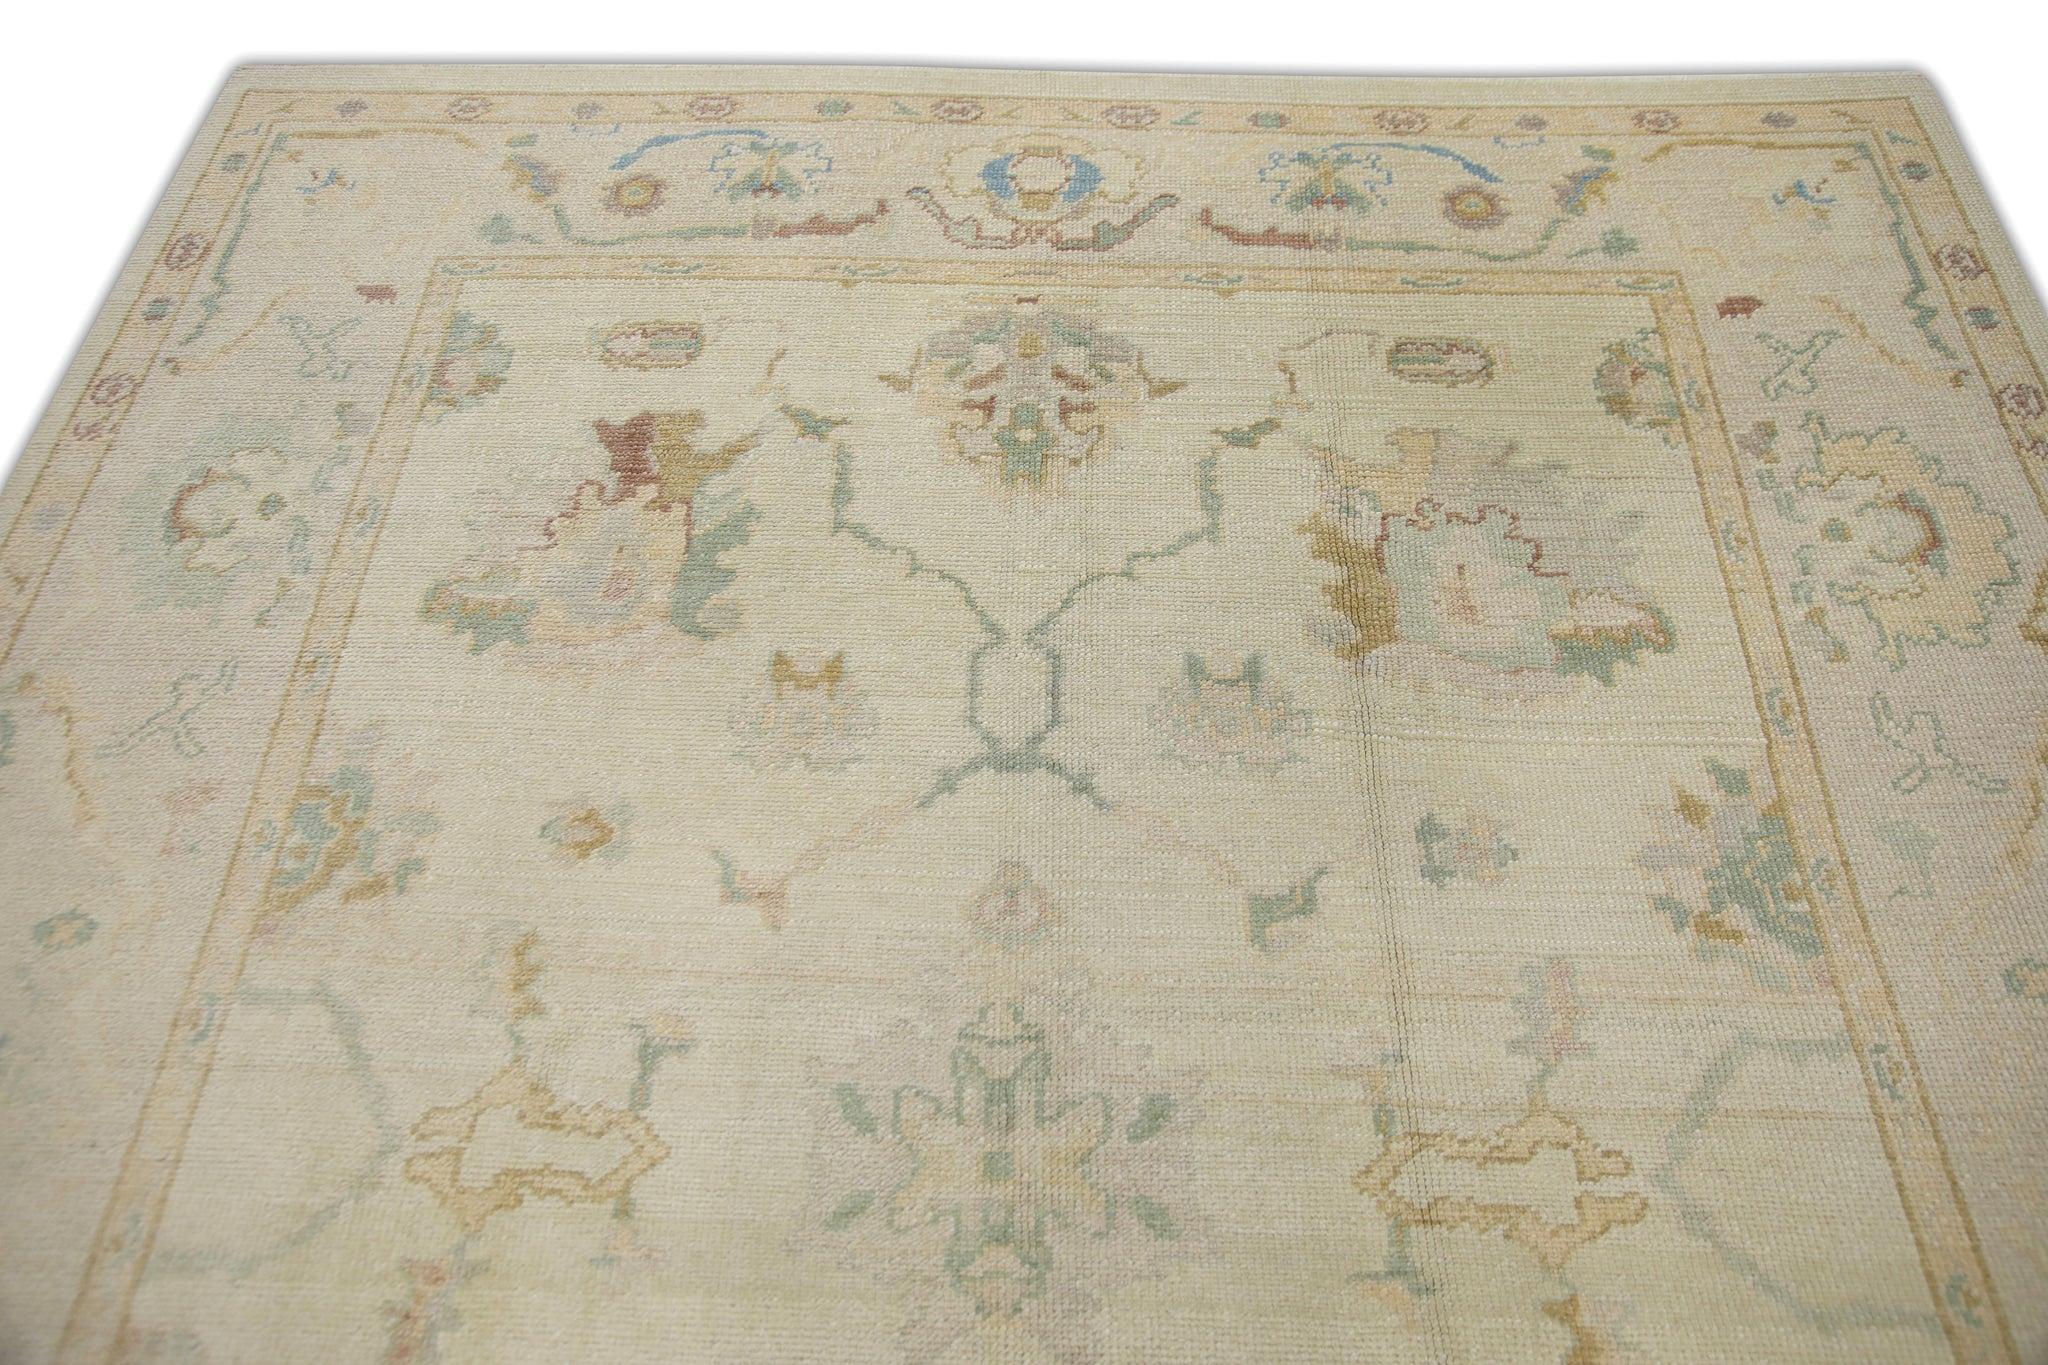 Contemporary Handwoven Wool Floral Turkish Oushak Rug in Soft Pink, Green, Blue 6'10